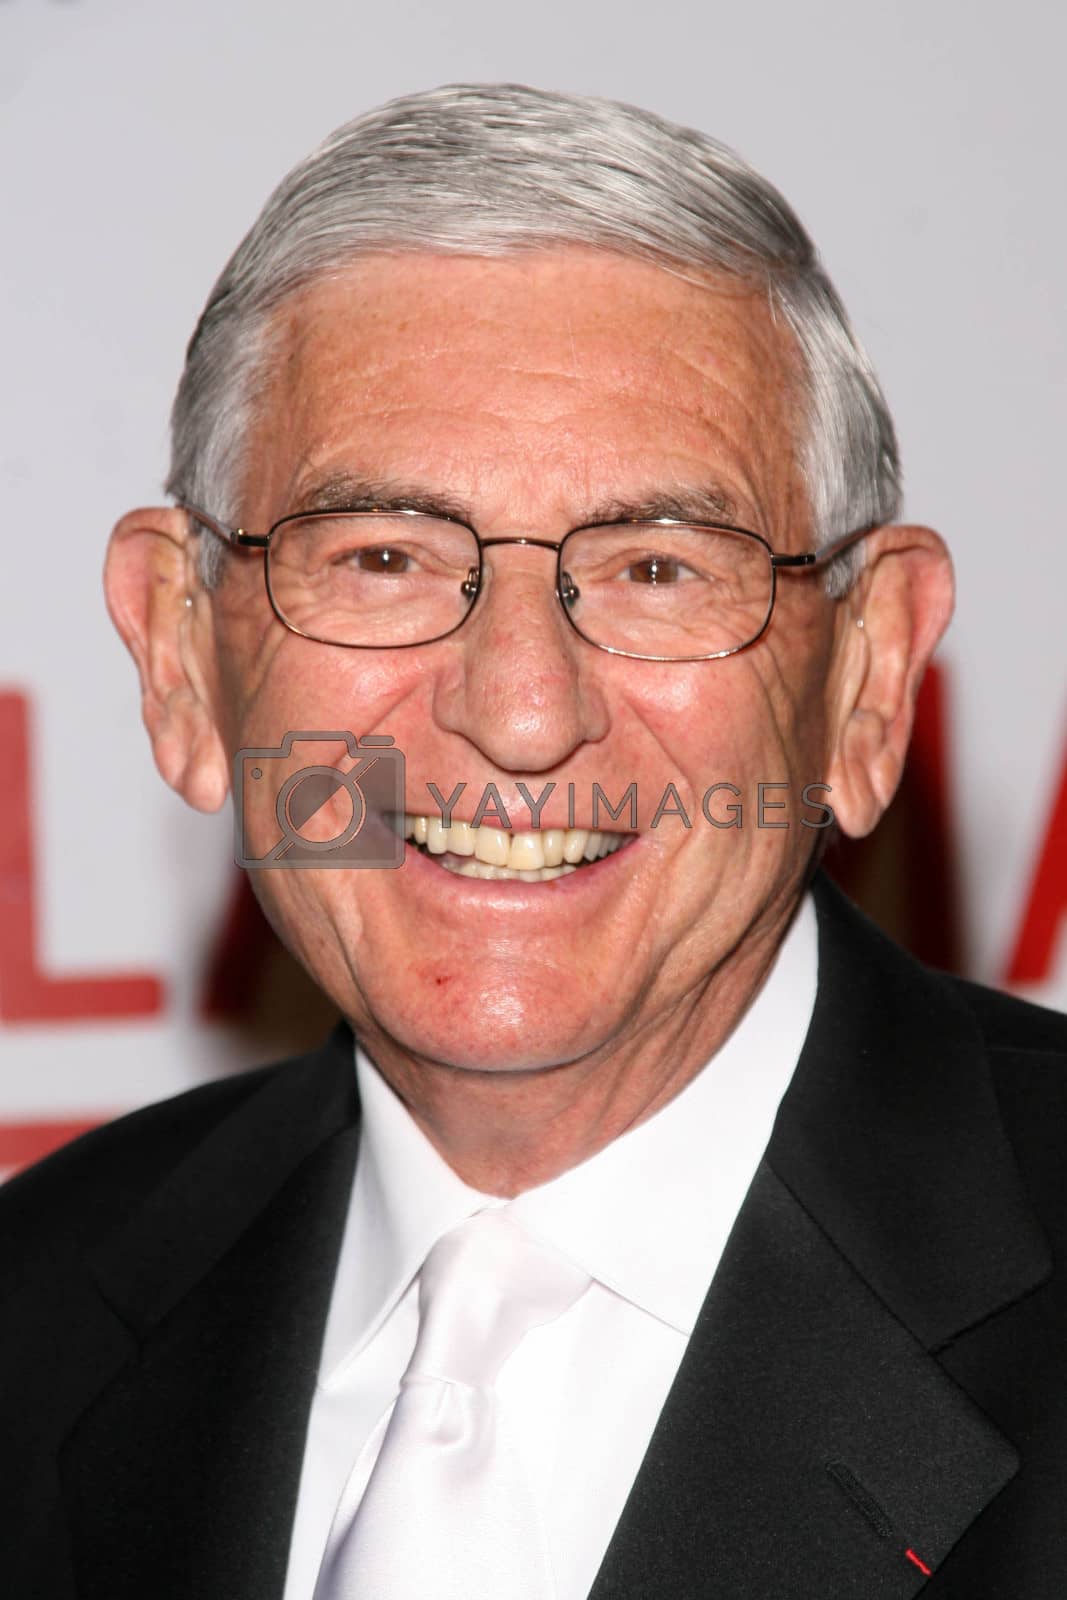 Royalty free image of Eli Broad
/ImageCollect by ImageCollect